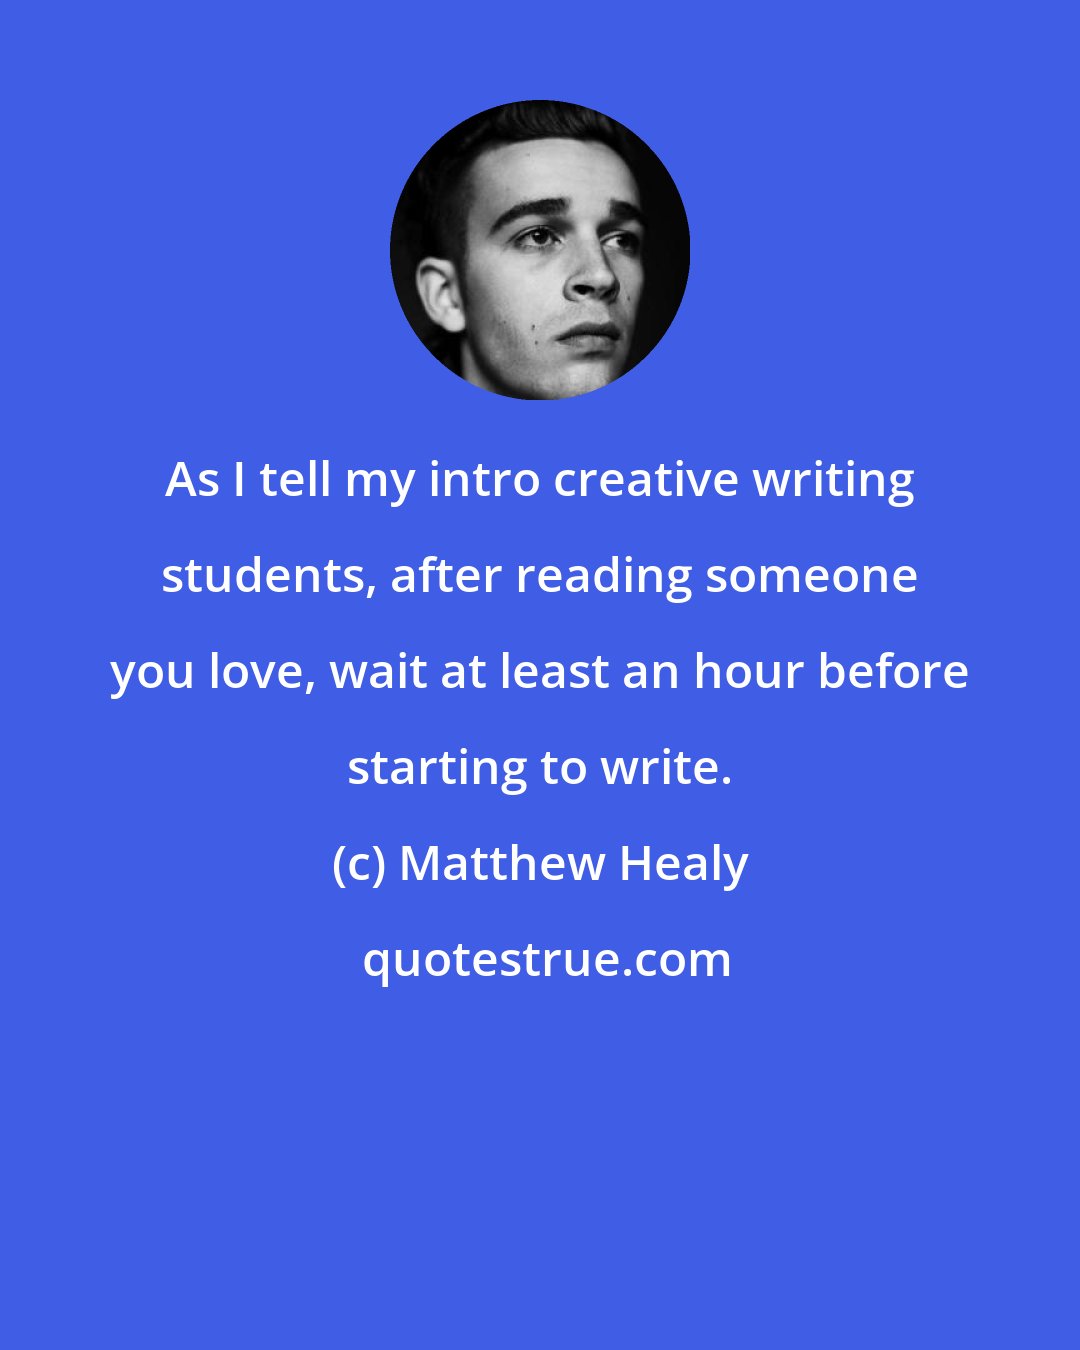 Matthew Healy: As I tell my intro creative writing students, after reading someone you love, wait at least an hour before starting to write.